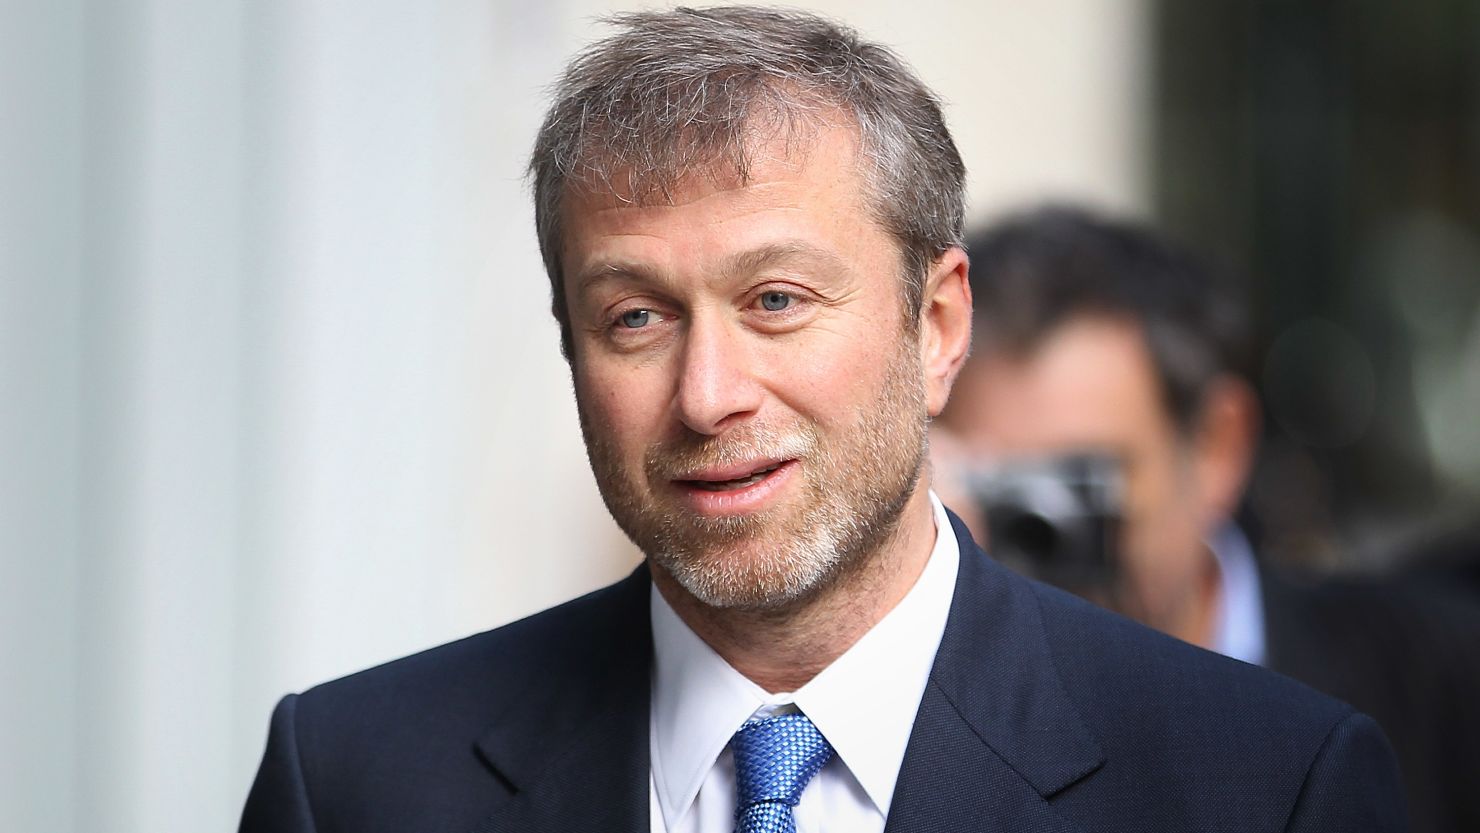 Abramovich missed his team's FA Cup final victory over Manchester United on Saturday.